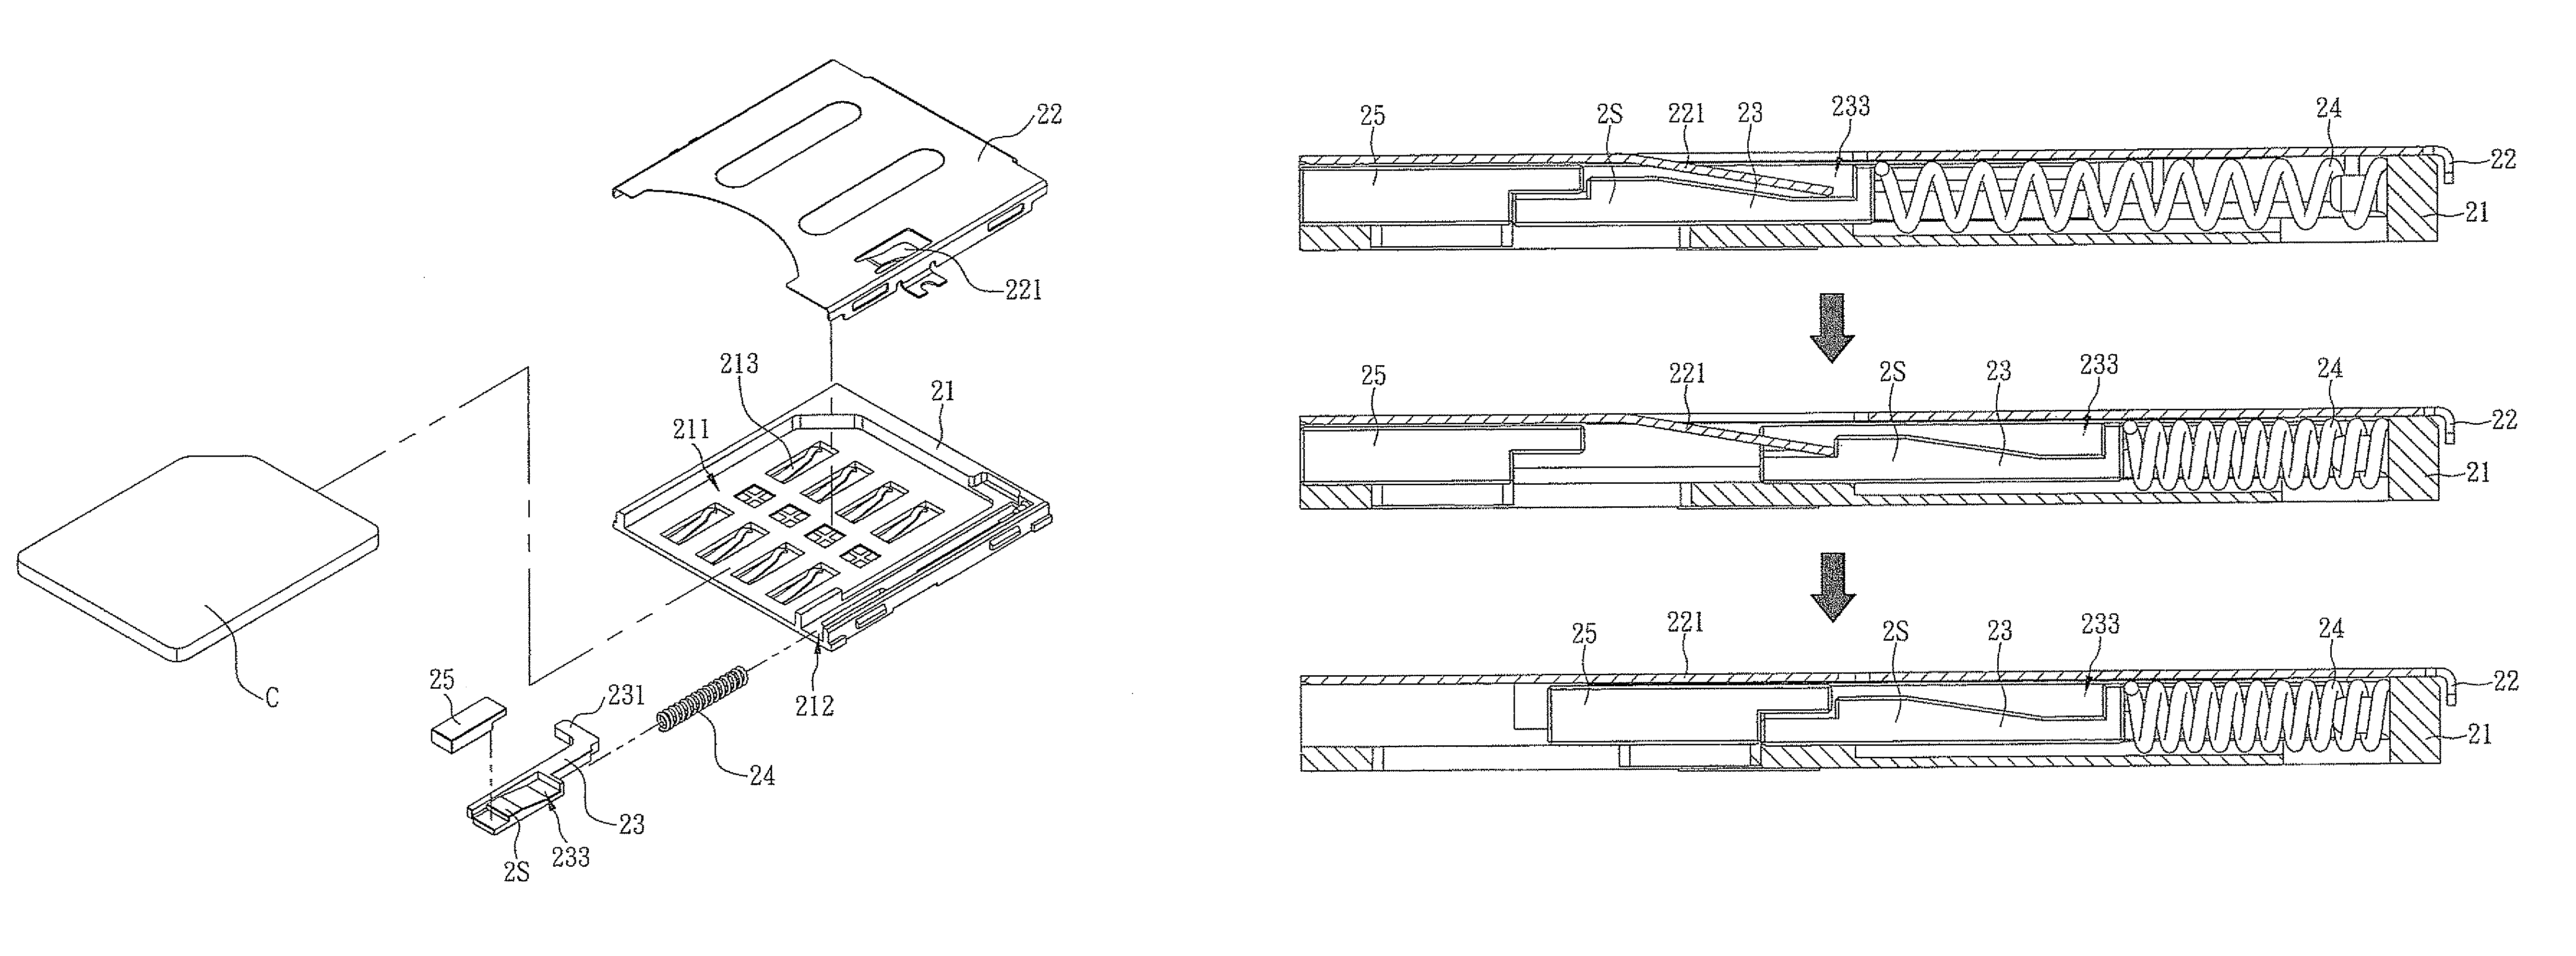 Card insert/eject mechanism having a position-limiting plate engaging a sliding block